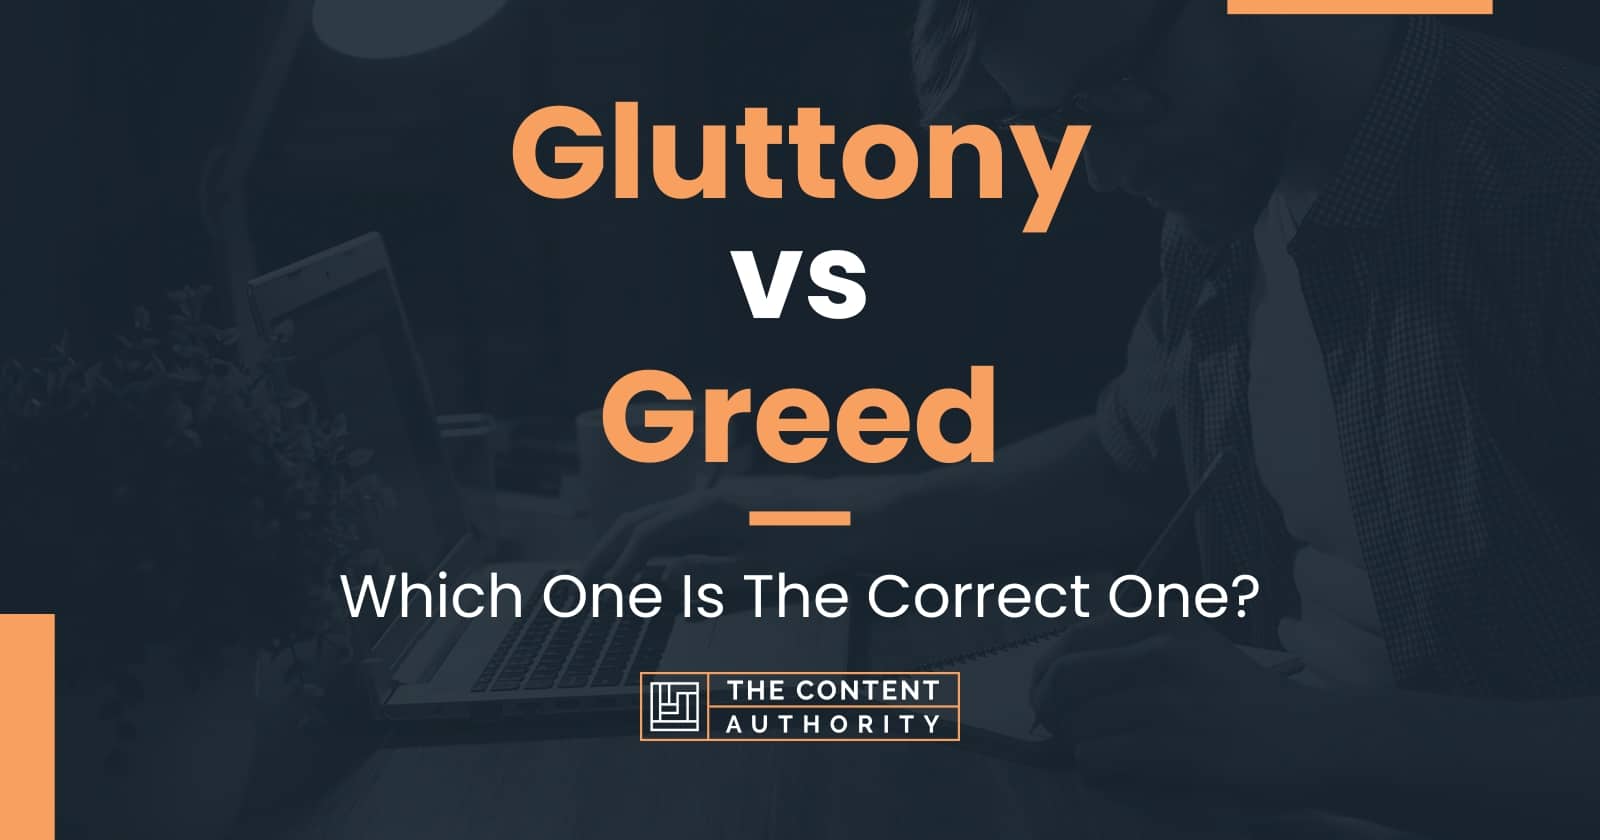 Gluttony vs Greed: Which One Is The Correct One?